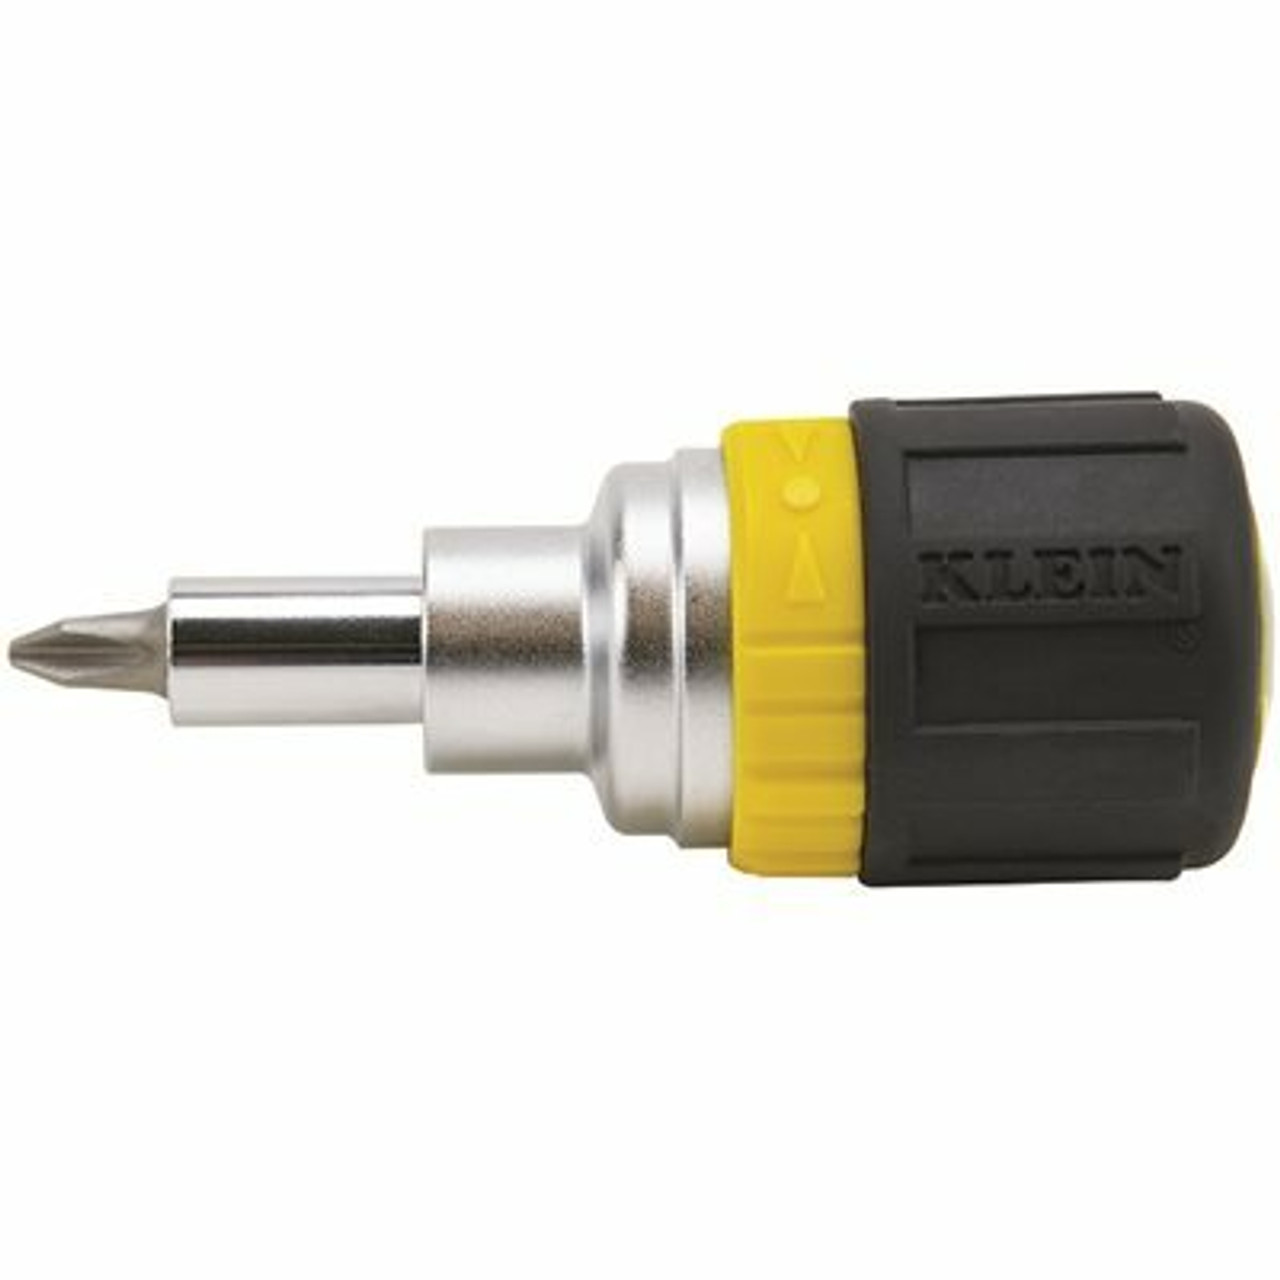 Klein Tools 6-In-1 Ratcheting Stubby Screwdriver- Cushion Grip Handle